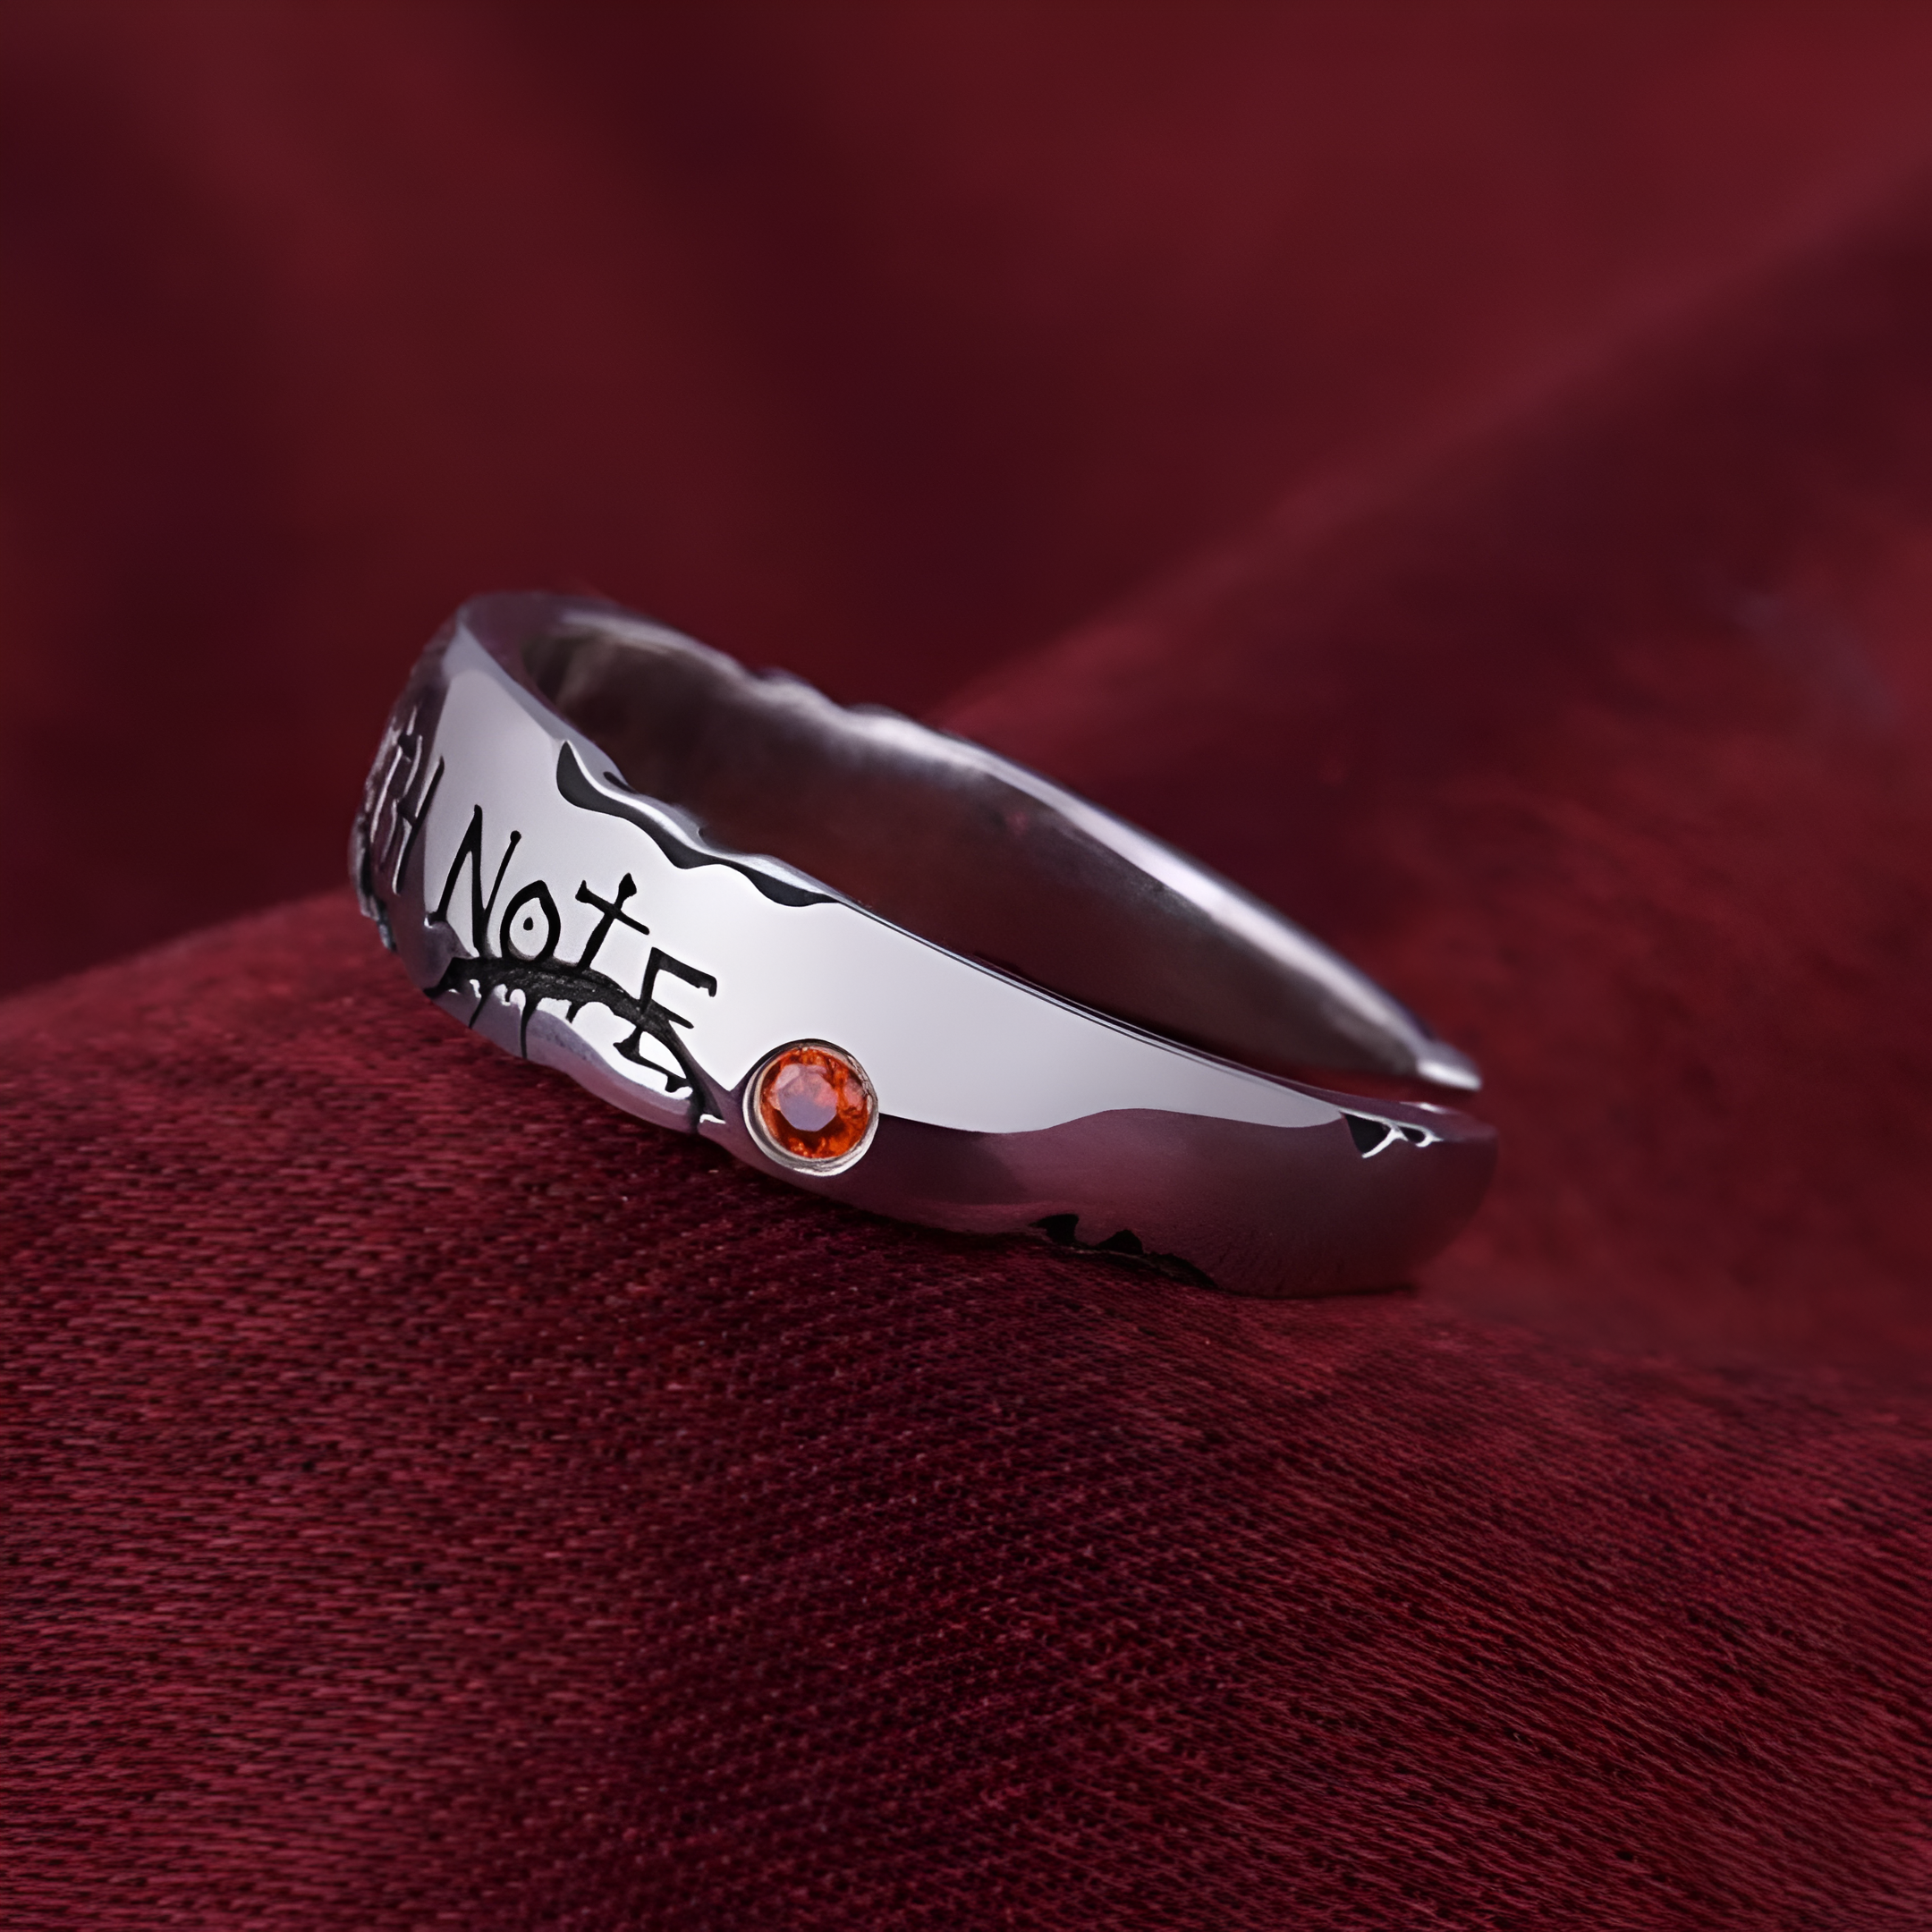 Death Note Ring (Adjustable)